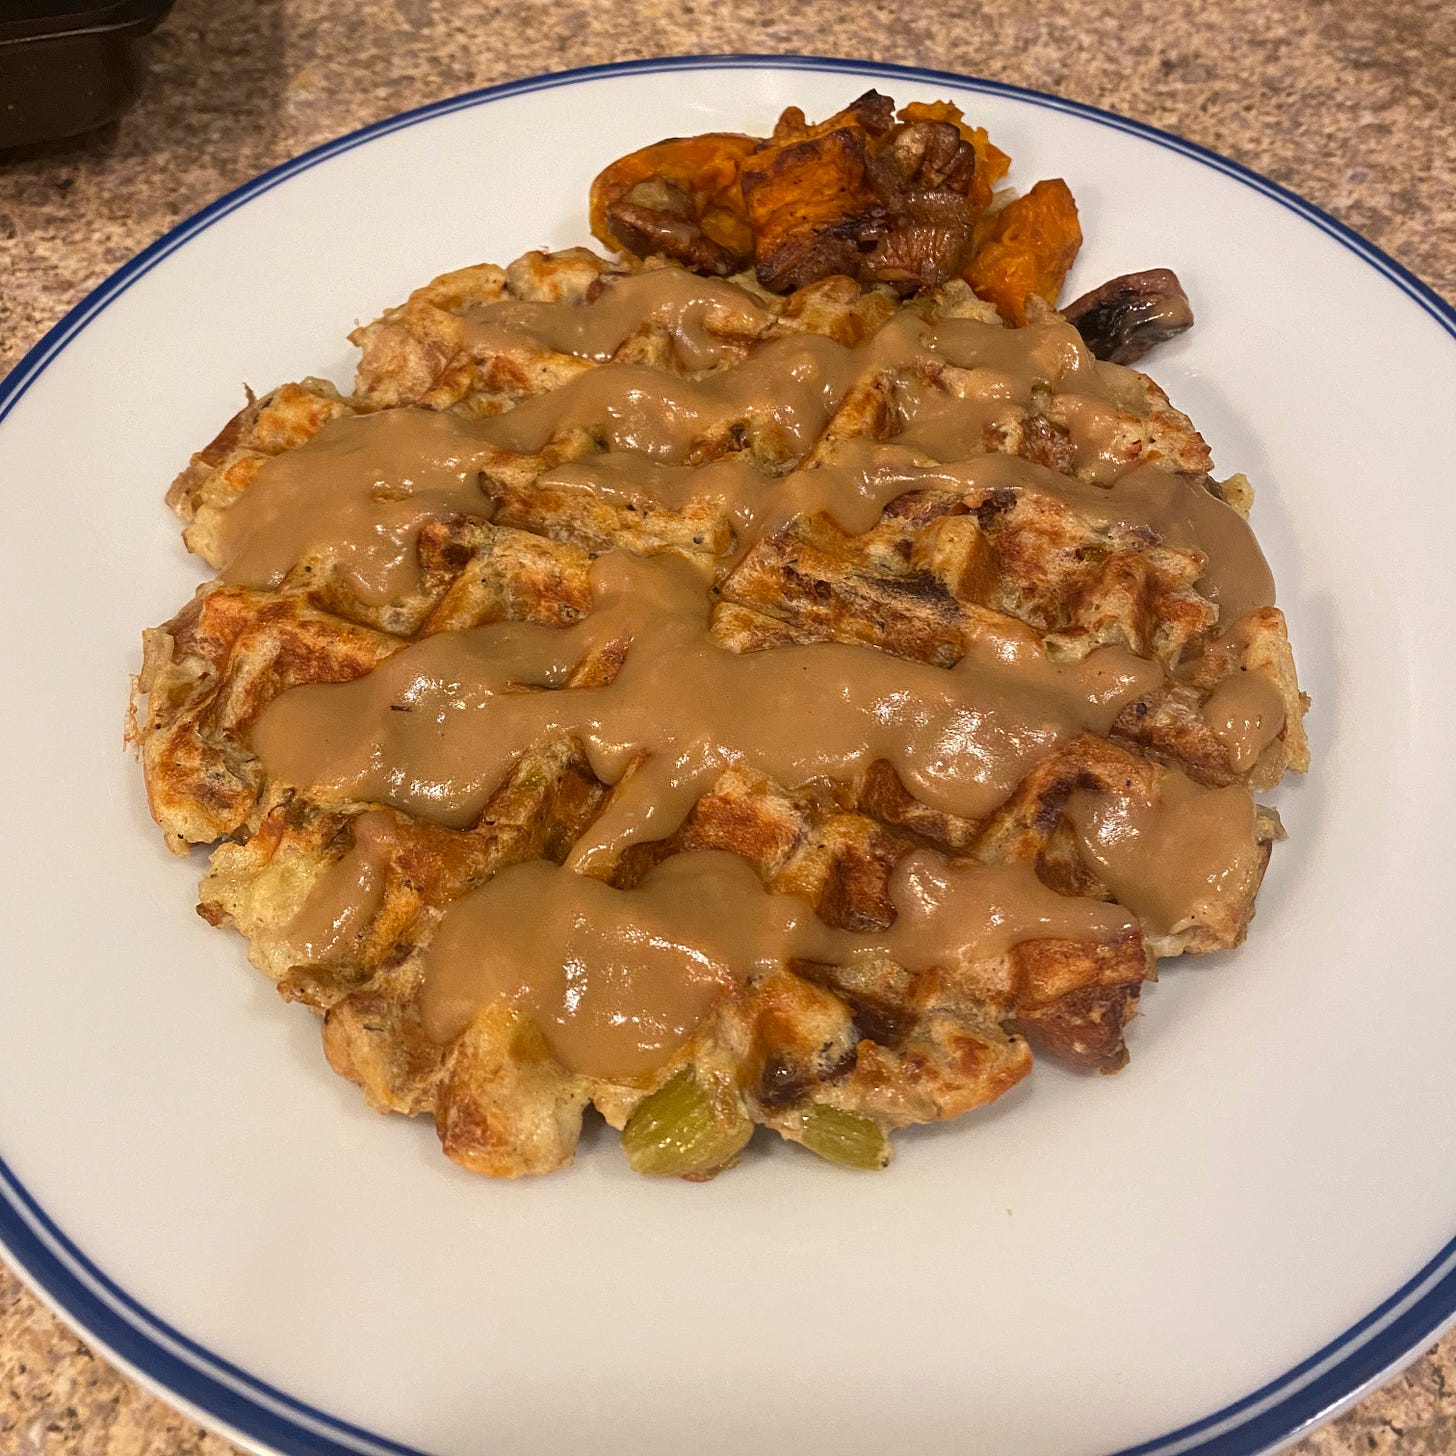 A stuffing waffle with gravy overtop. A small amount of roasted yams & brussels sprouts sits to the side.